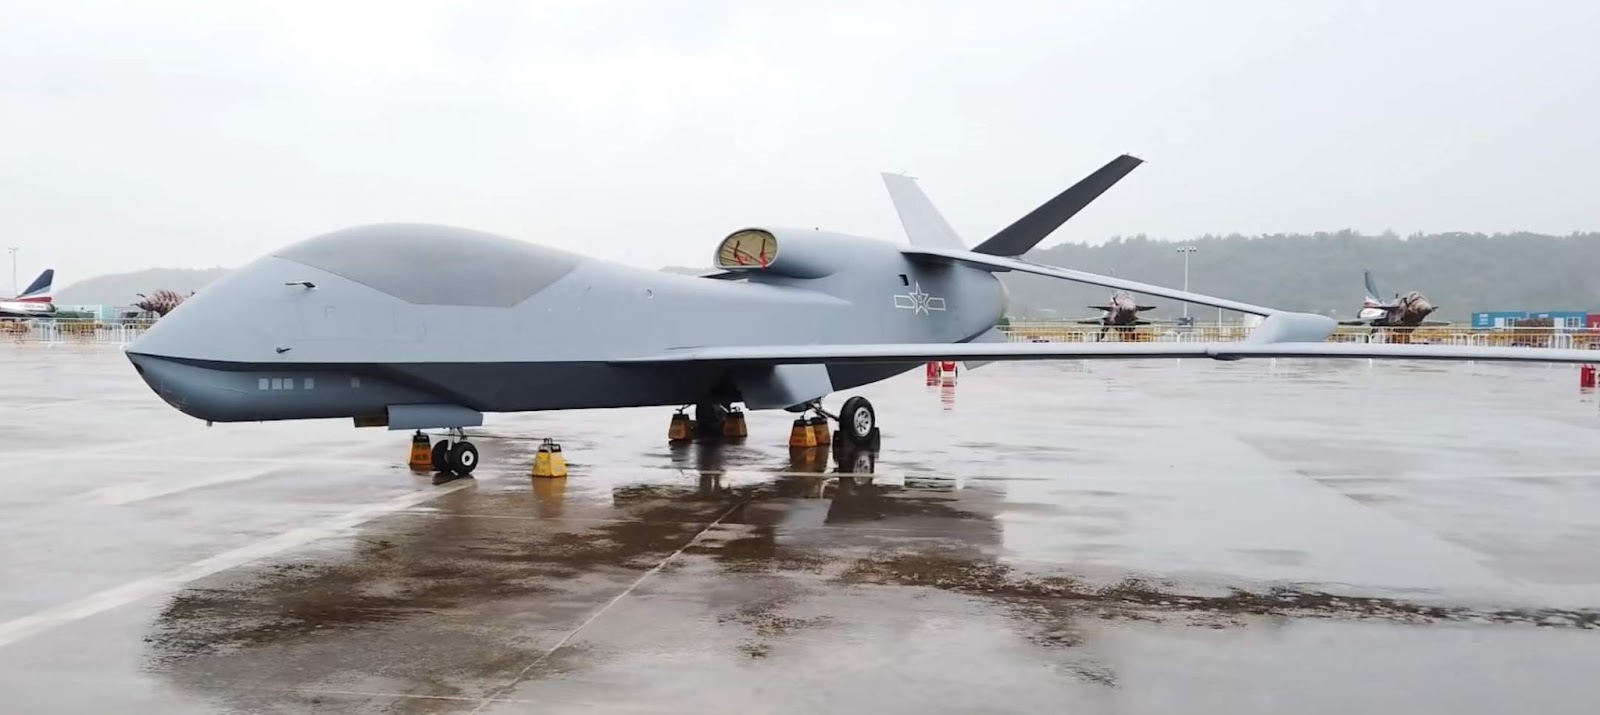 China’s unmanned WZ-7 'Soaring Dragon' surveillance drone